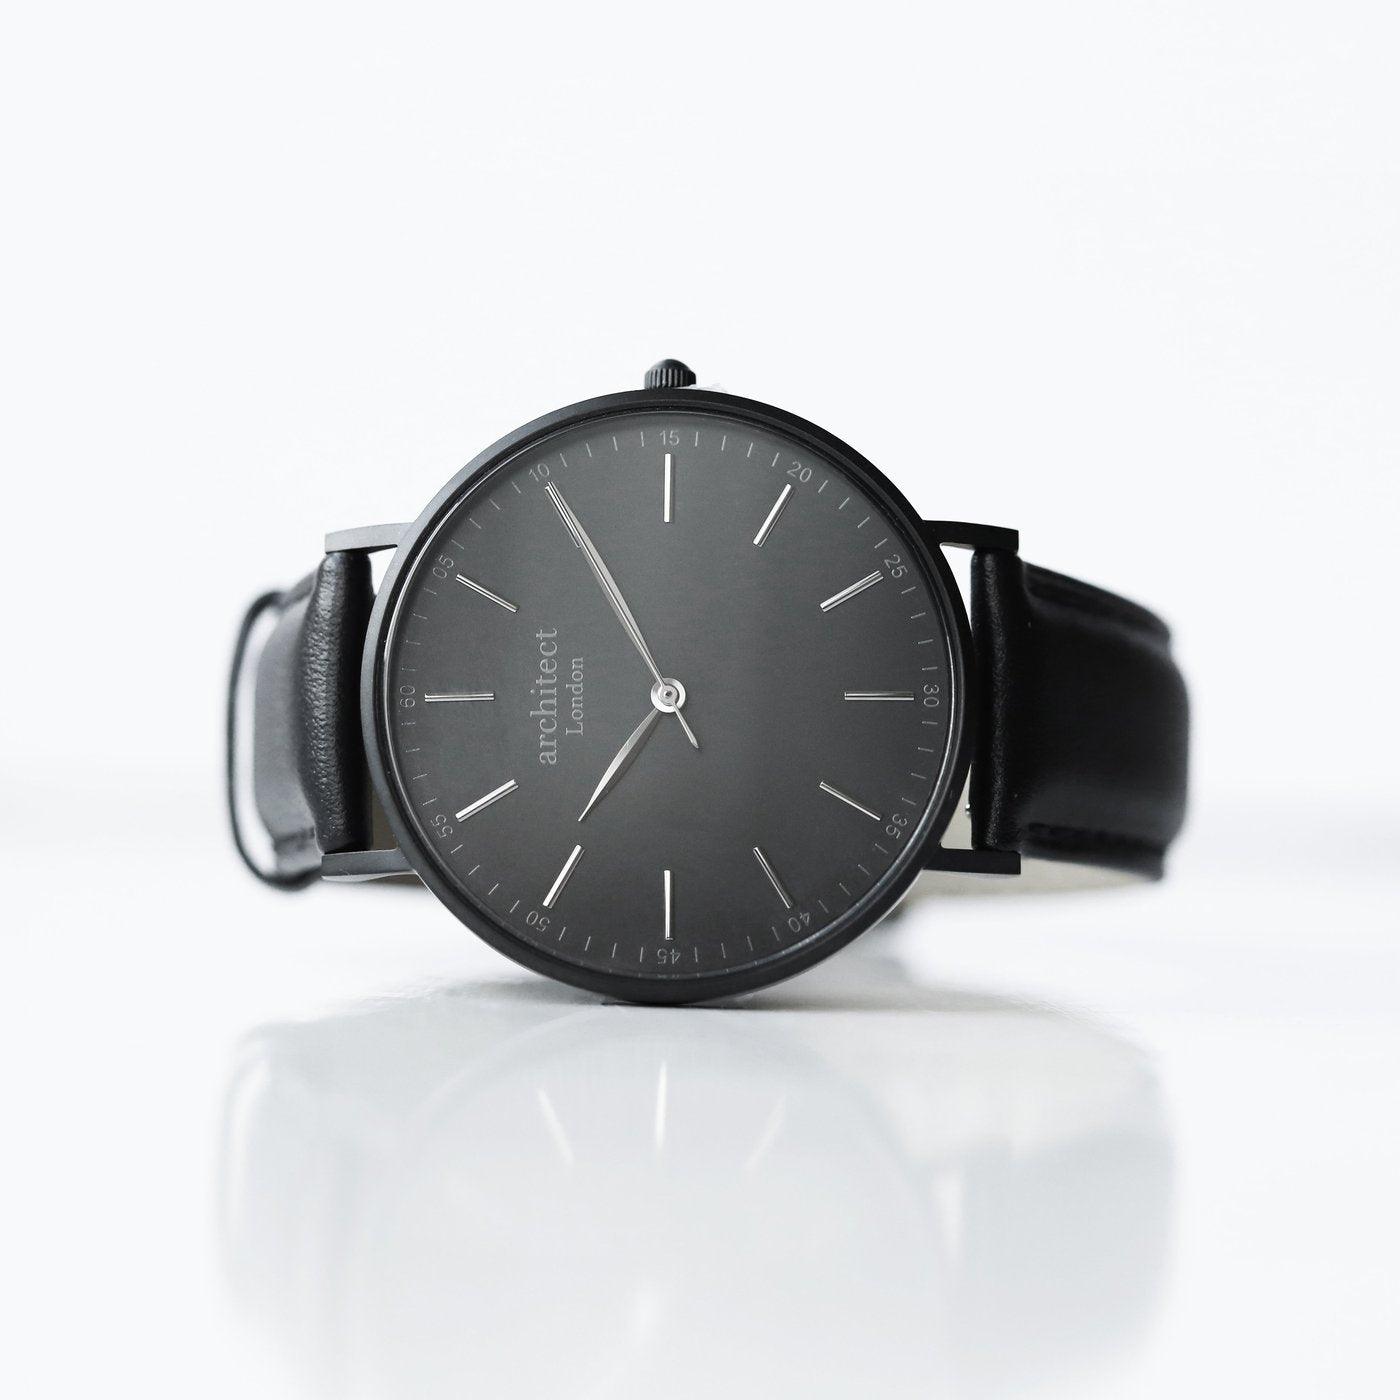 Personalised Men's Architect Watch With Jet Black Strap & Modern Font - Shop Personalised Gifts